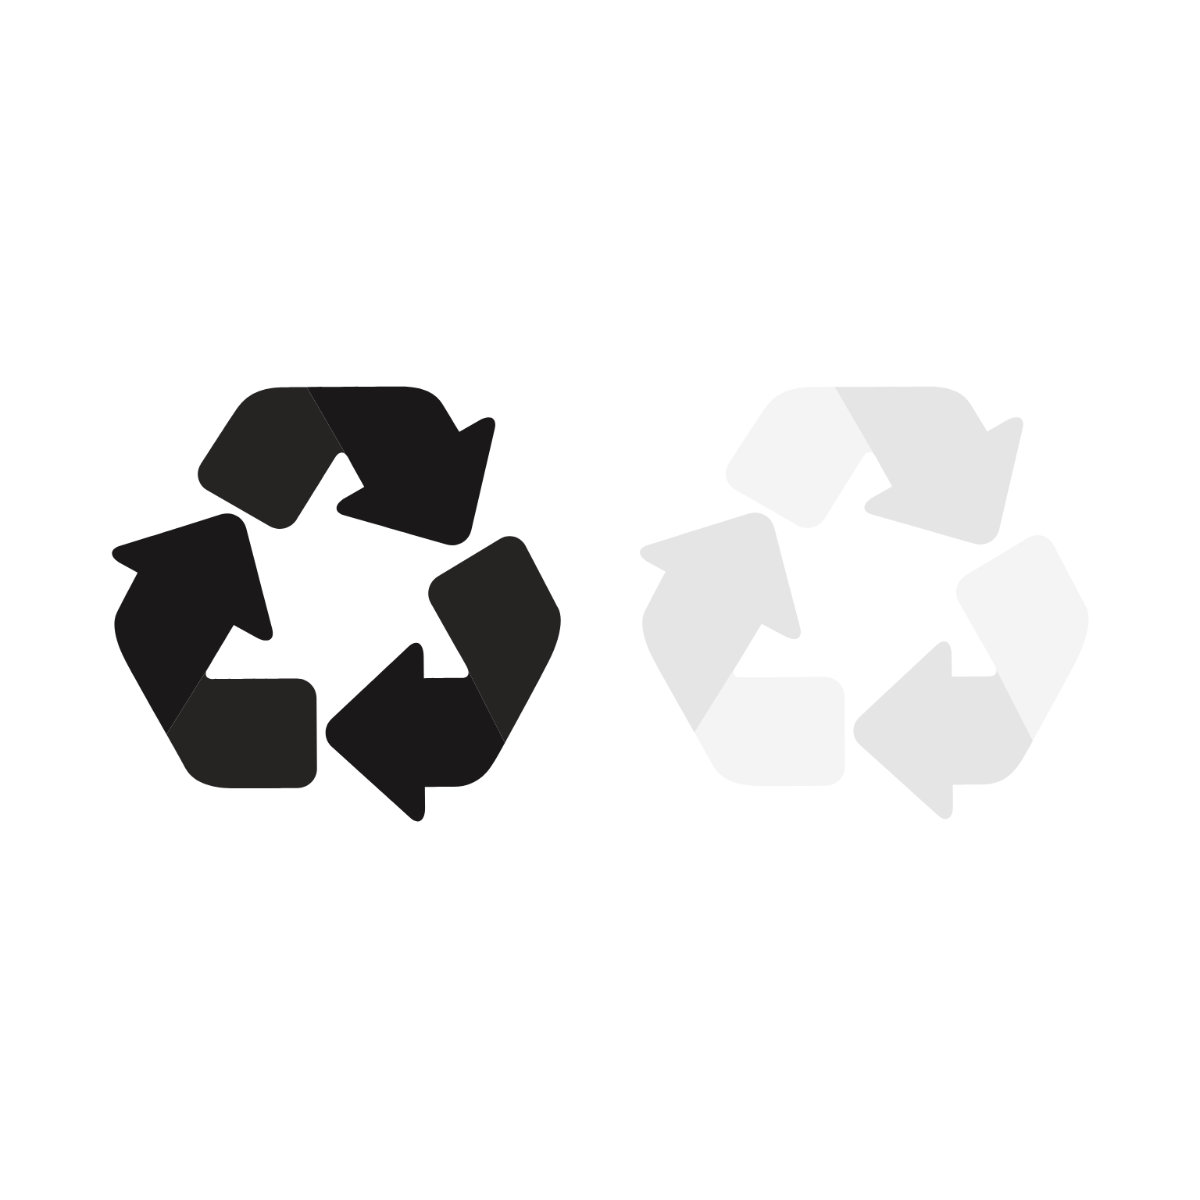 Free Black And White Recycle Vector Template